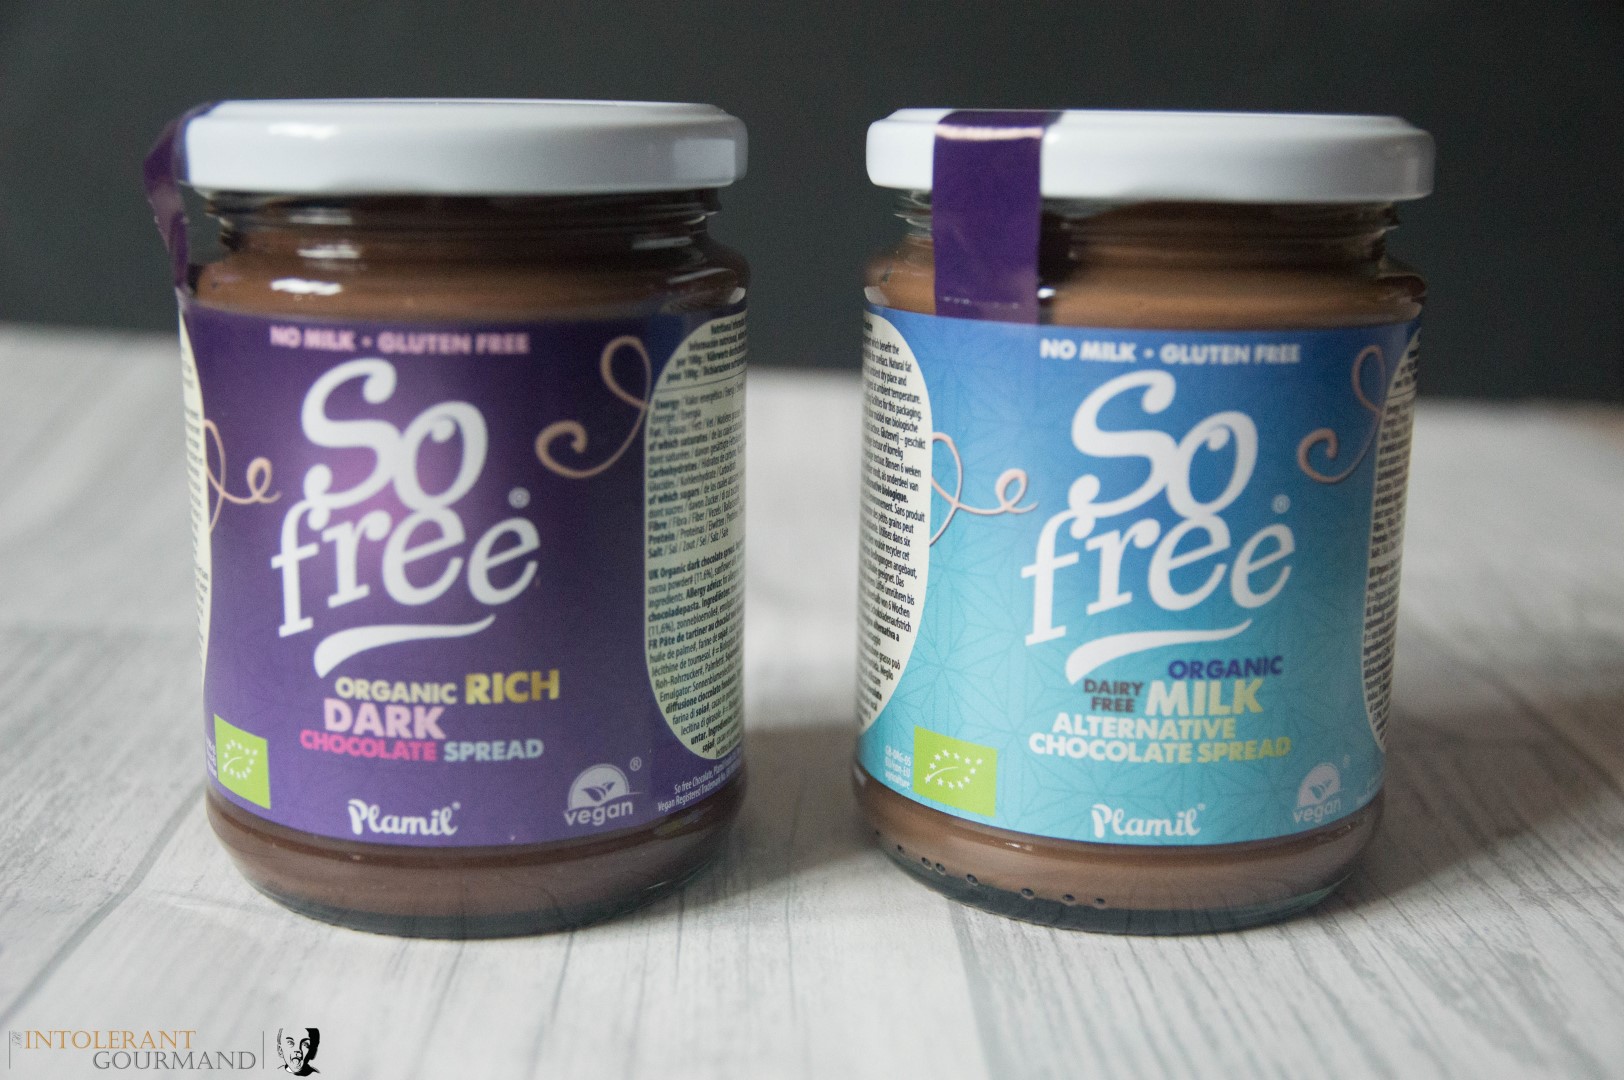 Plamil Chocolate spread, dairy-free, gluten-free, vegan and nut-free too! Perfect for toast, porridge, cakes and more! www.intolerantgourmand.com